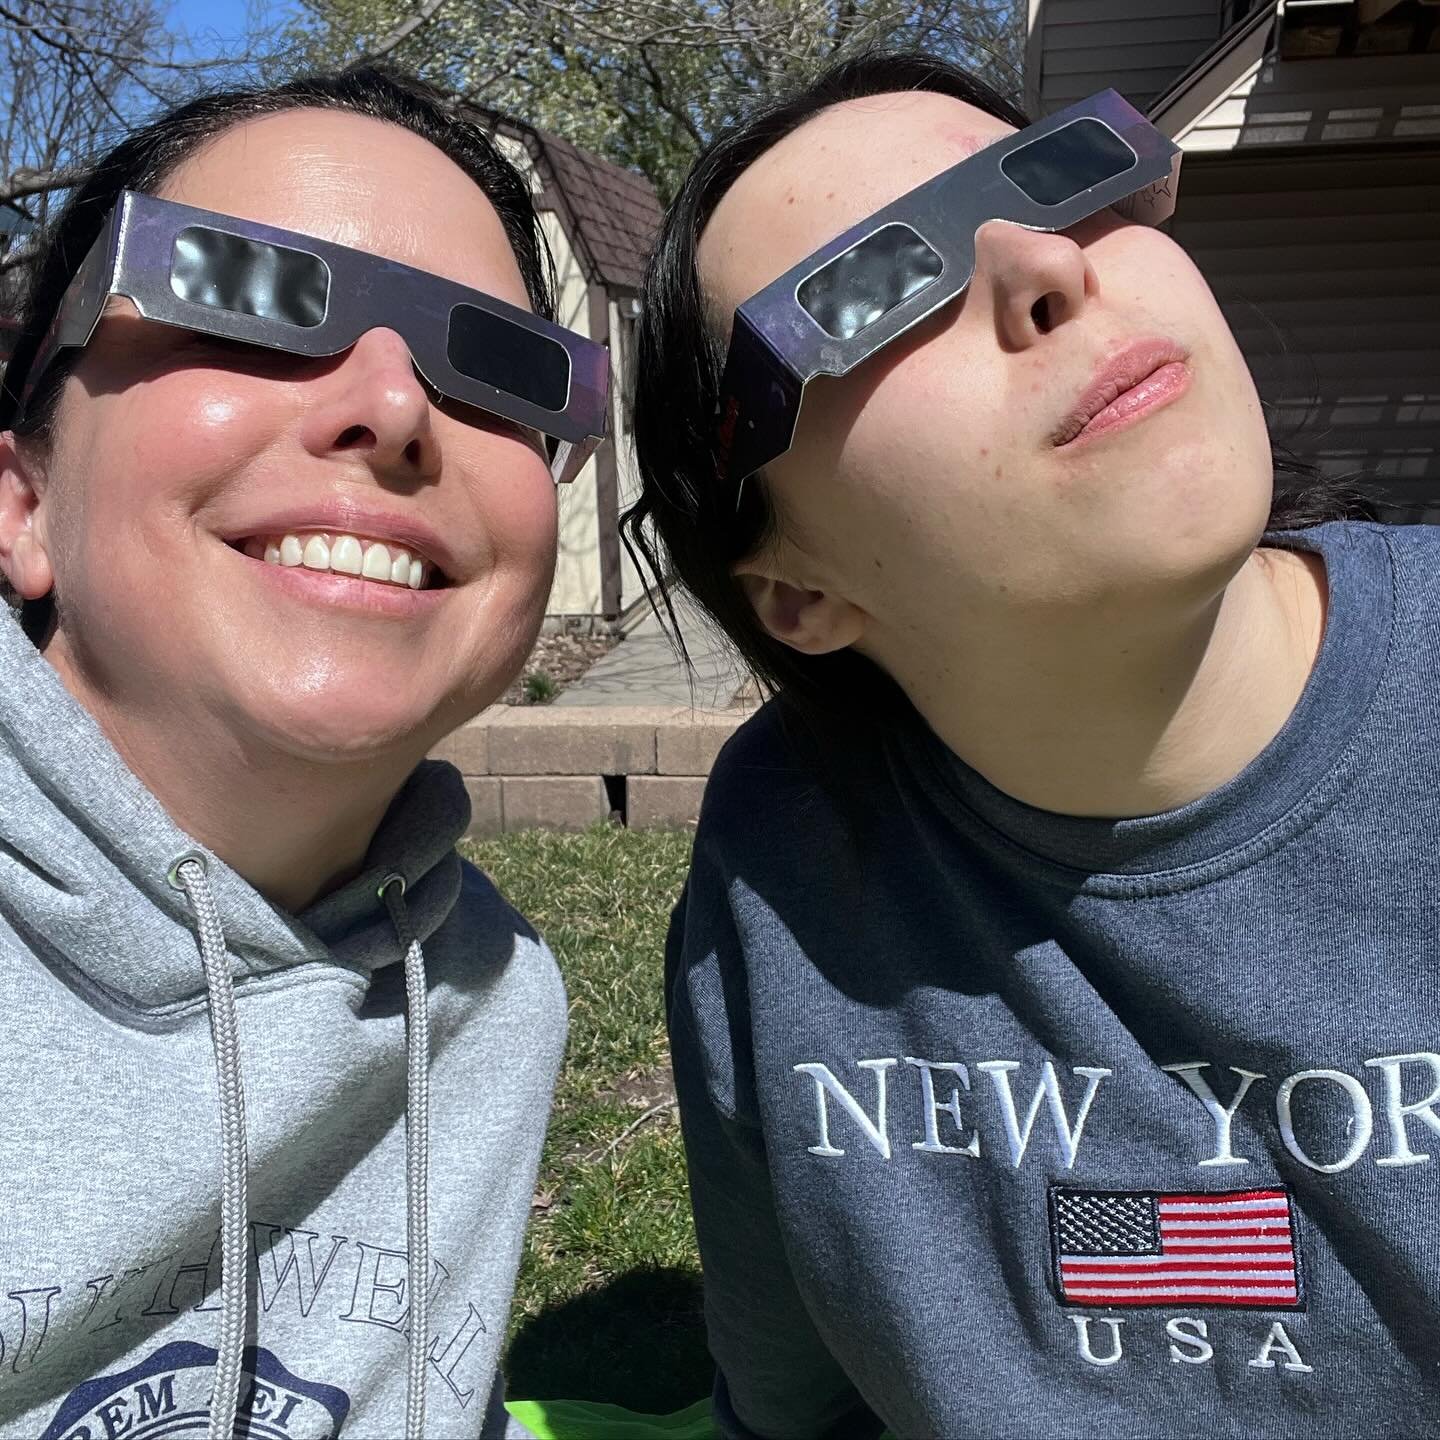 Eclipse day 2024 in the backyard with my big girl and an after school celebratory snack with the little one.

We had about 80% of it eclipsed here in Nebraska and the temps sure dropped along the way.

2017 total eclipse still goes down in the histor